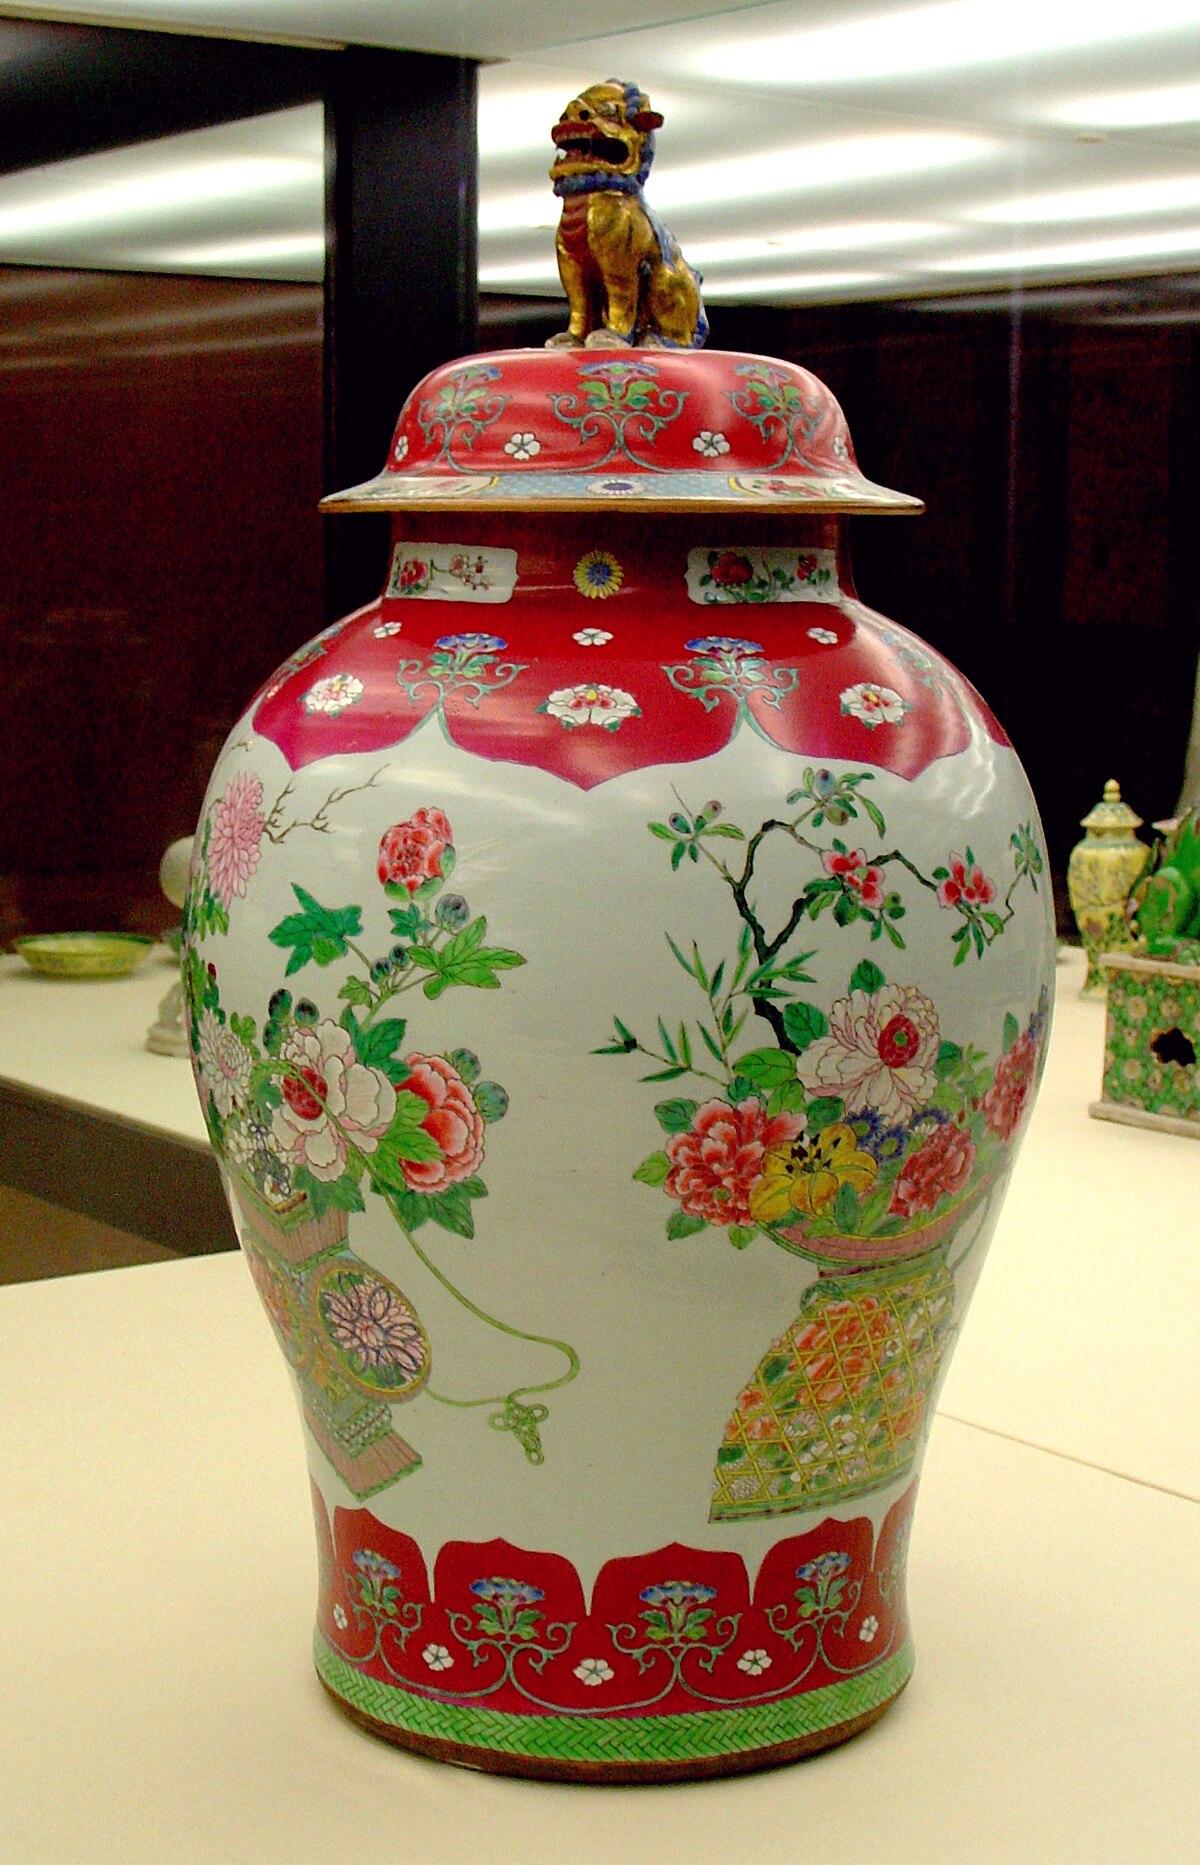 Porcelain trade in Qing China - Wikipedia